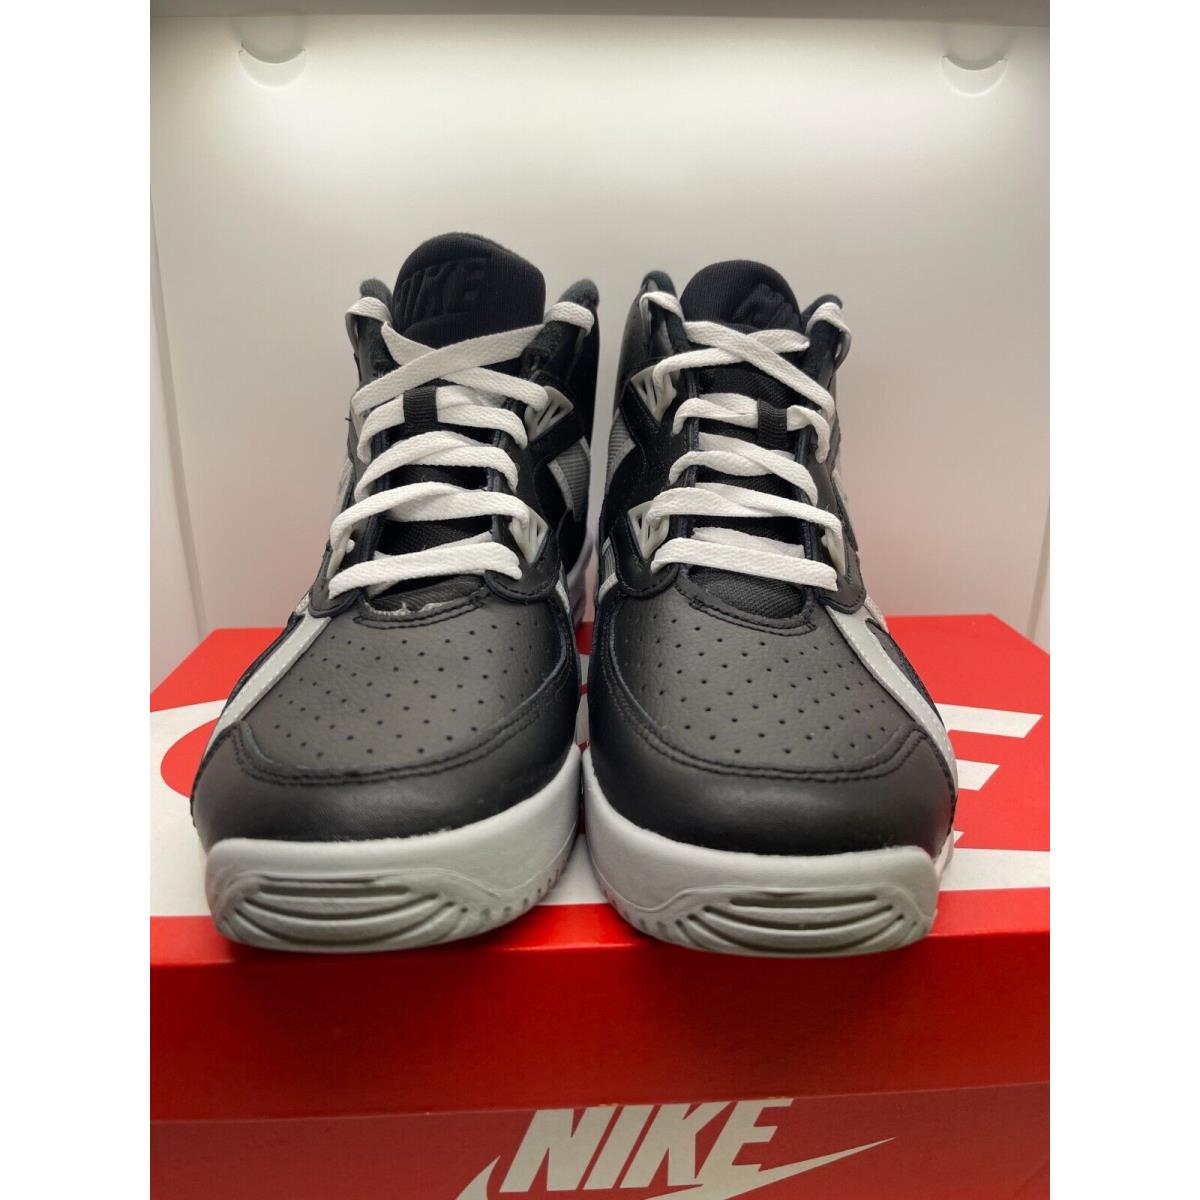 Nike shoes Air Trainer - Gray 2